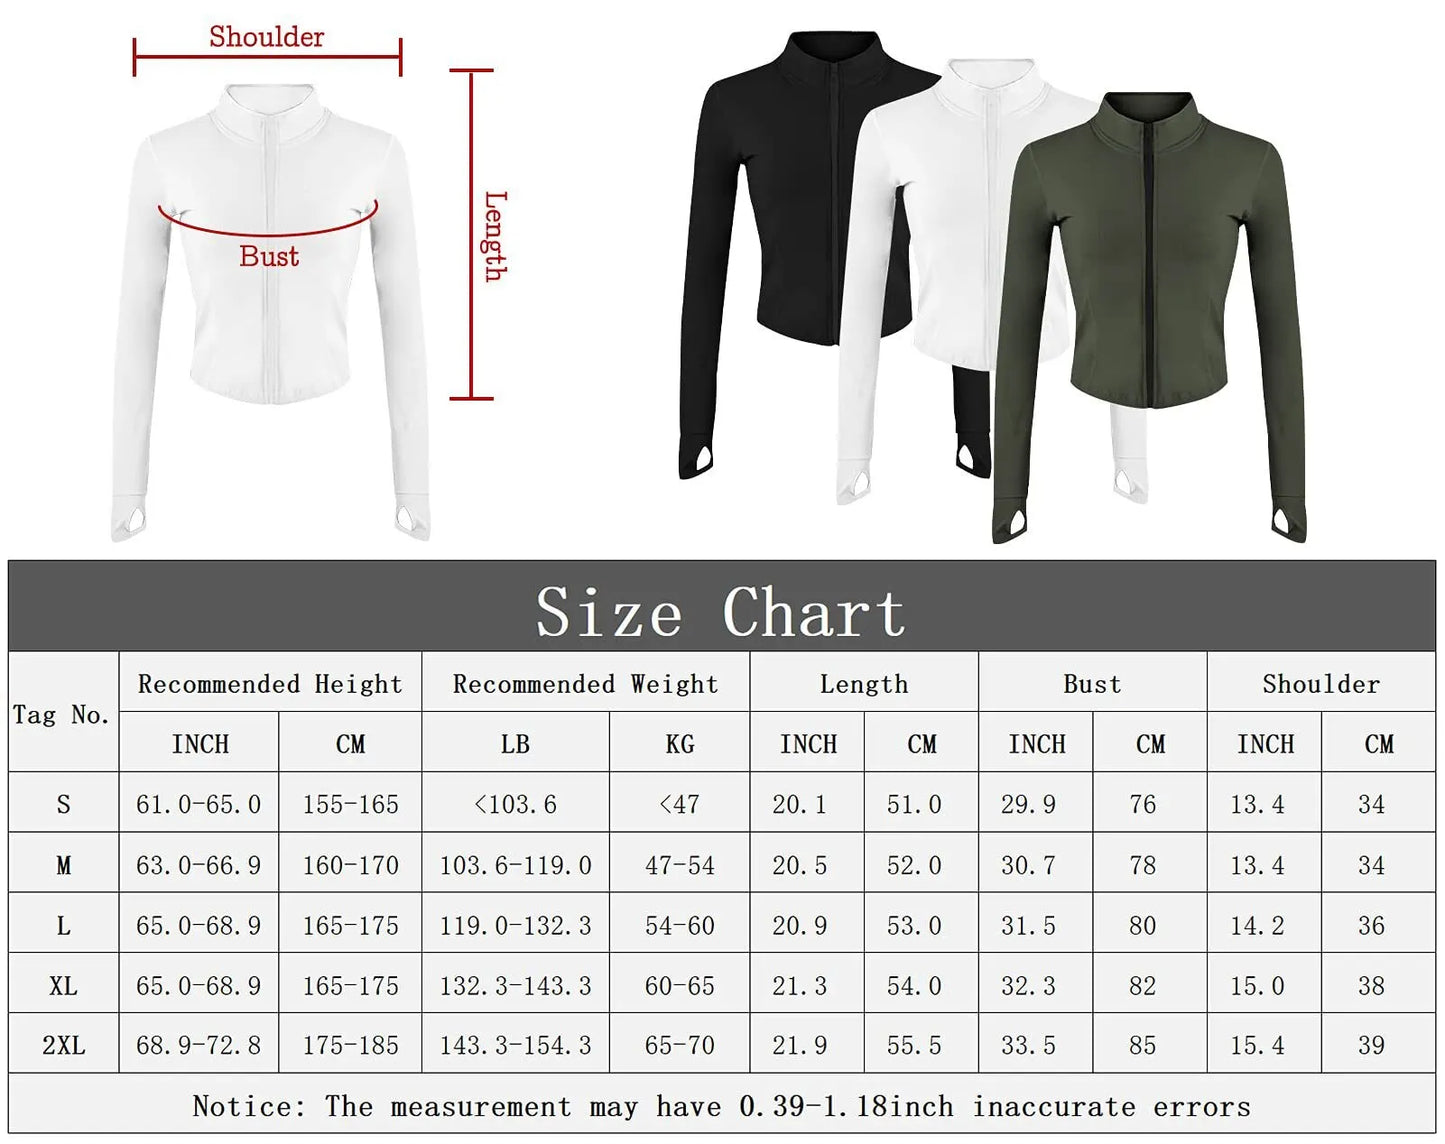 Women's Tracksuit Jacket: Slim Fit Long-Sleeved Fitness Coat with Thumb Holes, Yoga Crop Tops, Gym Workout Sweatshirts